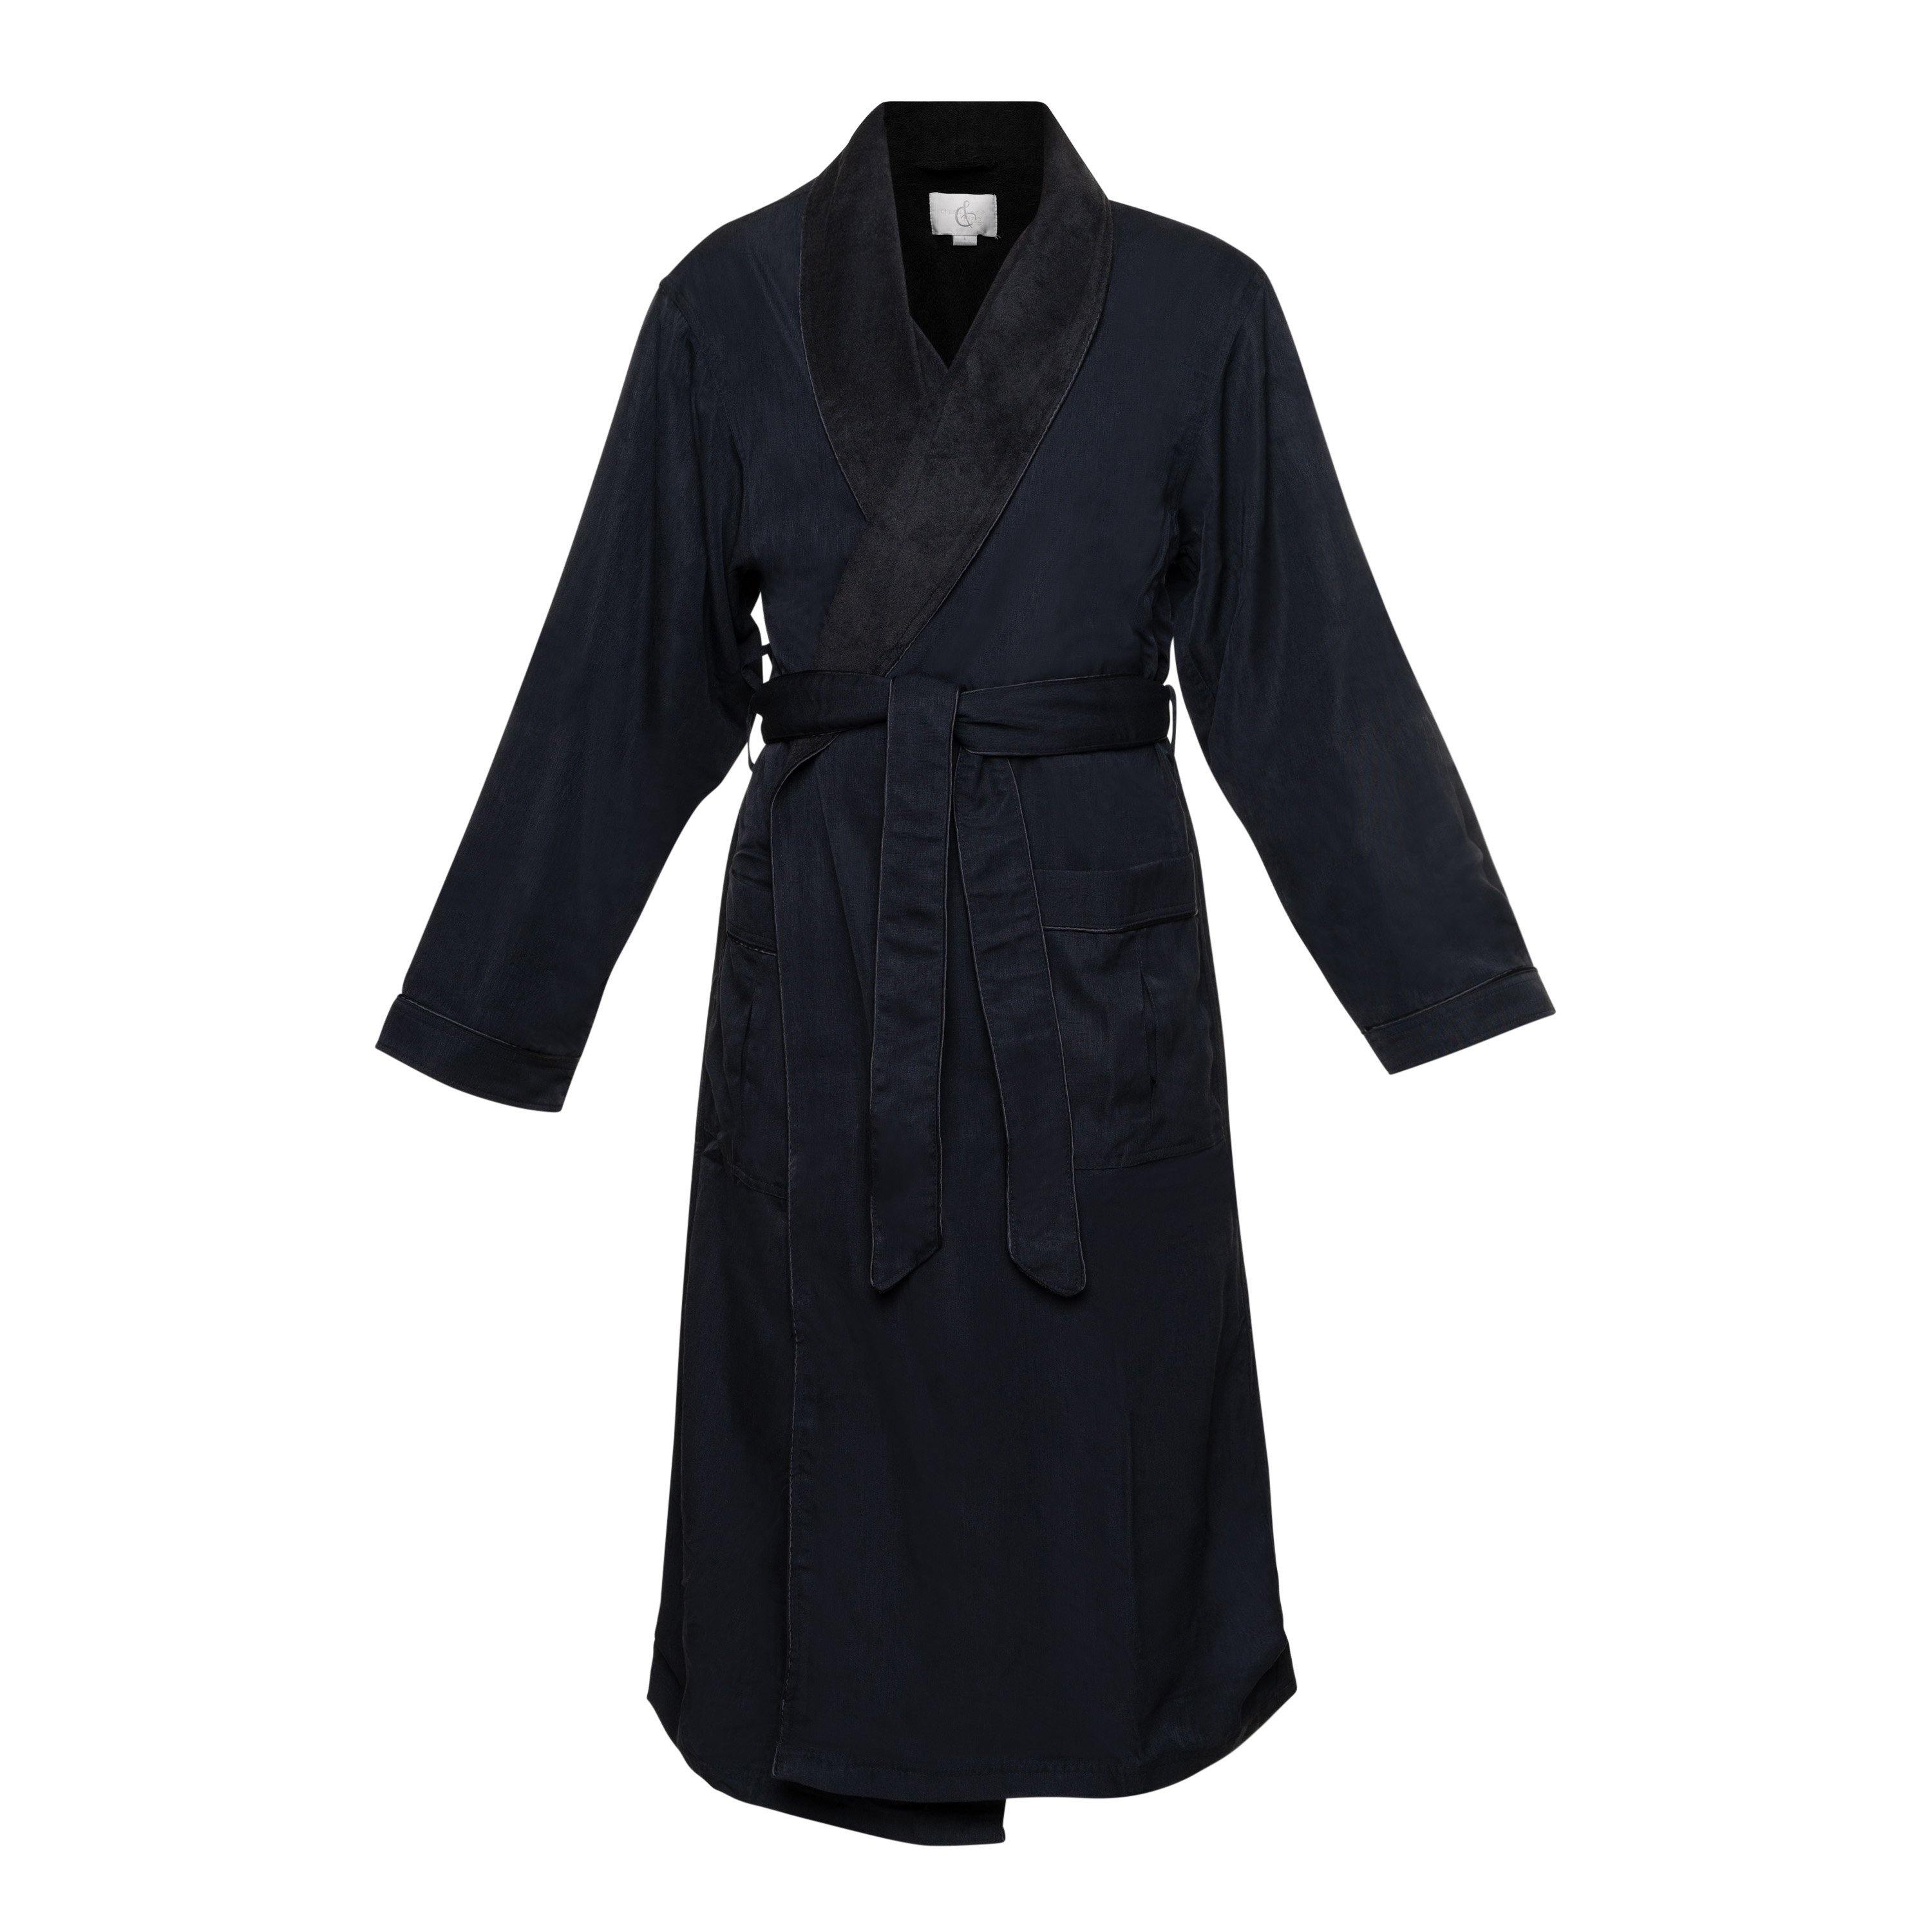 Luxury Prose Dressing Gown - High End Linens and Sleepwear